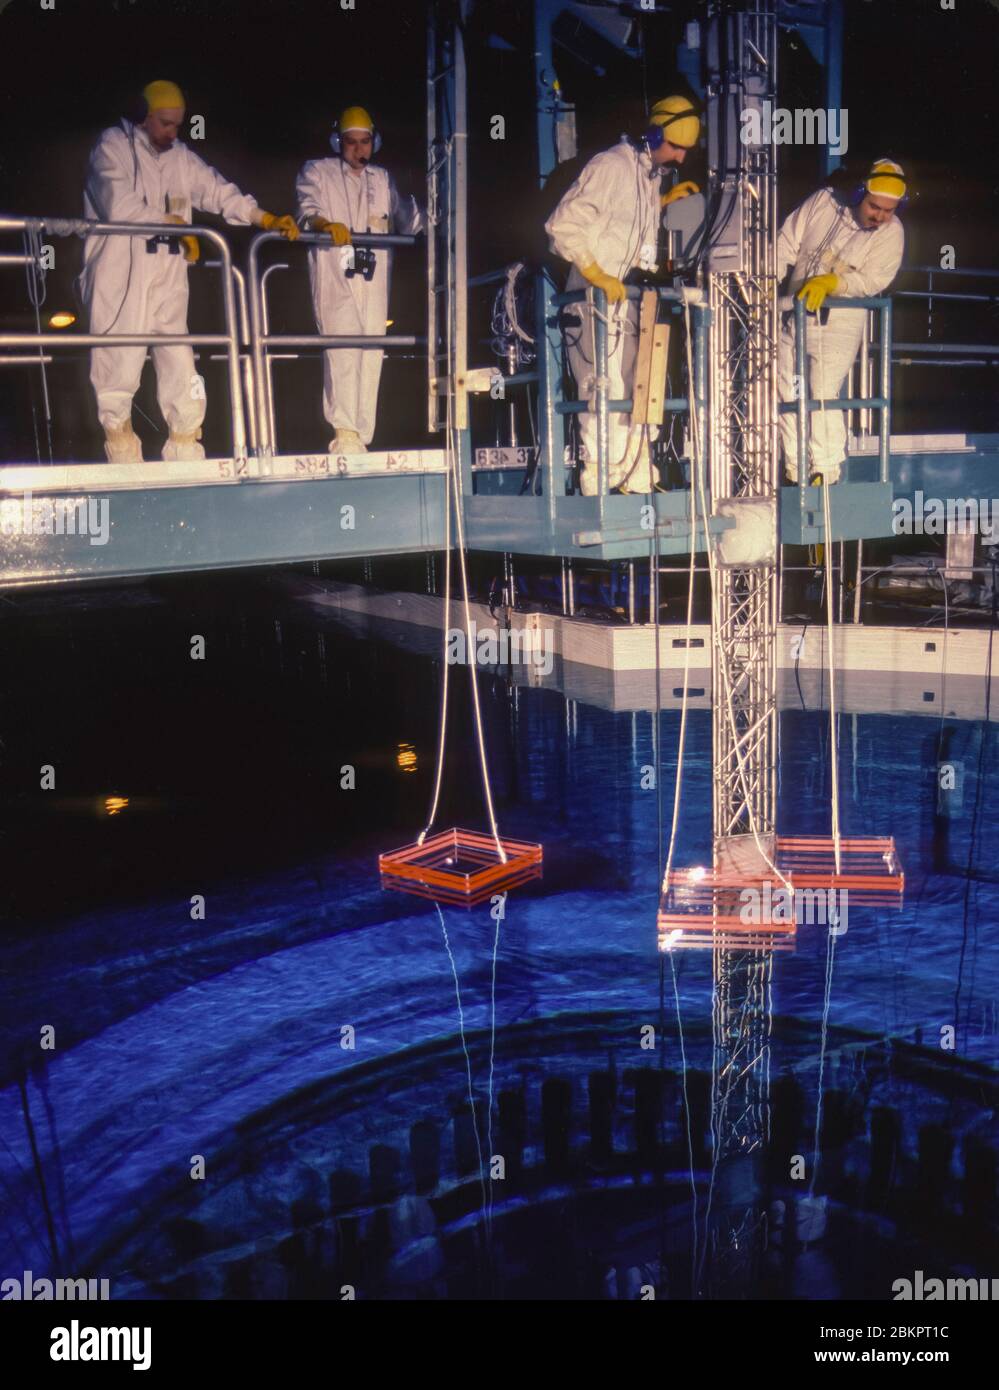 SCRIBA, NEW YORK, USA, 1985 - Technicians at work during refueling of reactor core, at Fitzpatrick Nuclear Power Plant, Nine Mile Point. Stock Photo